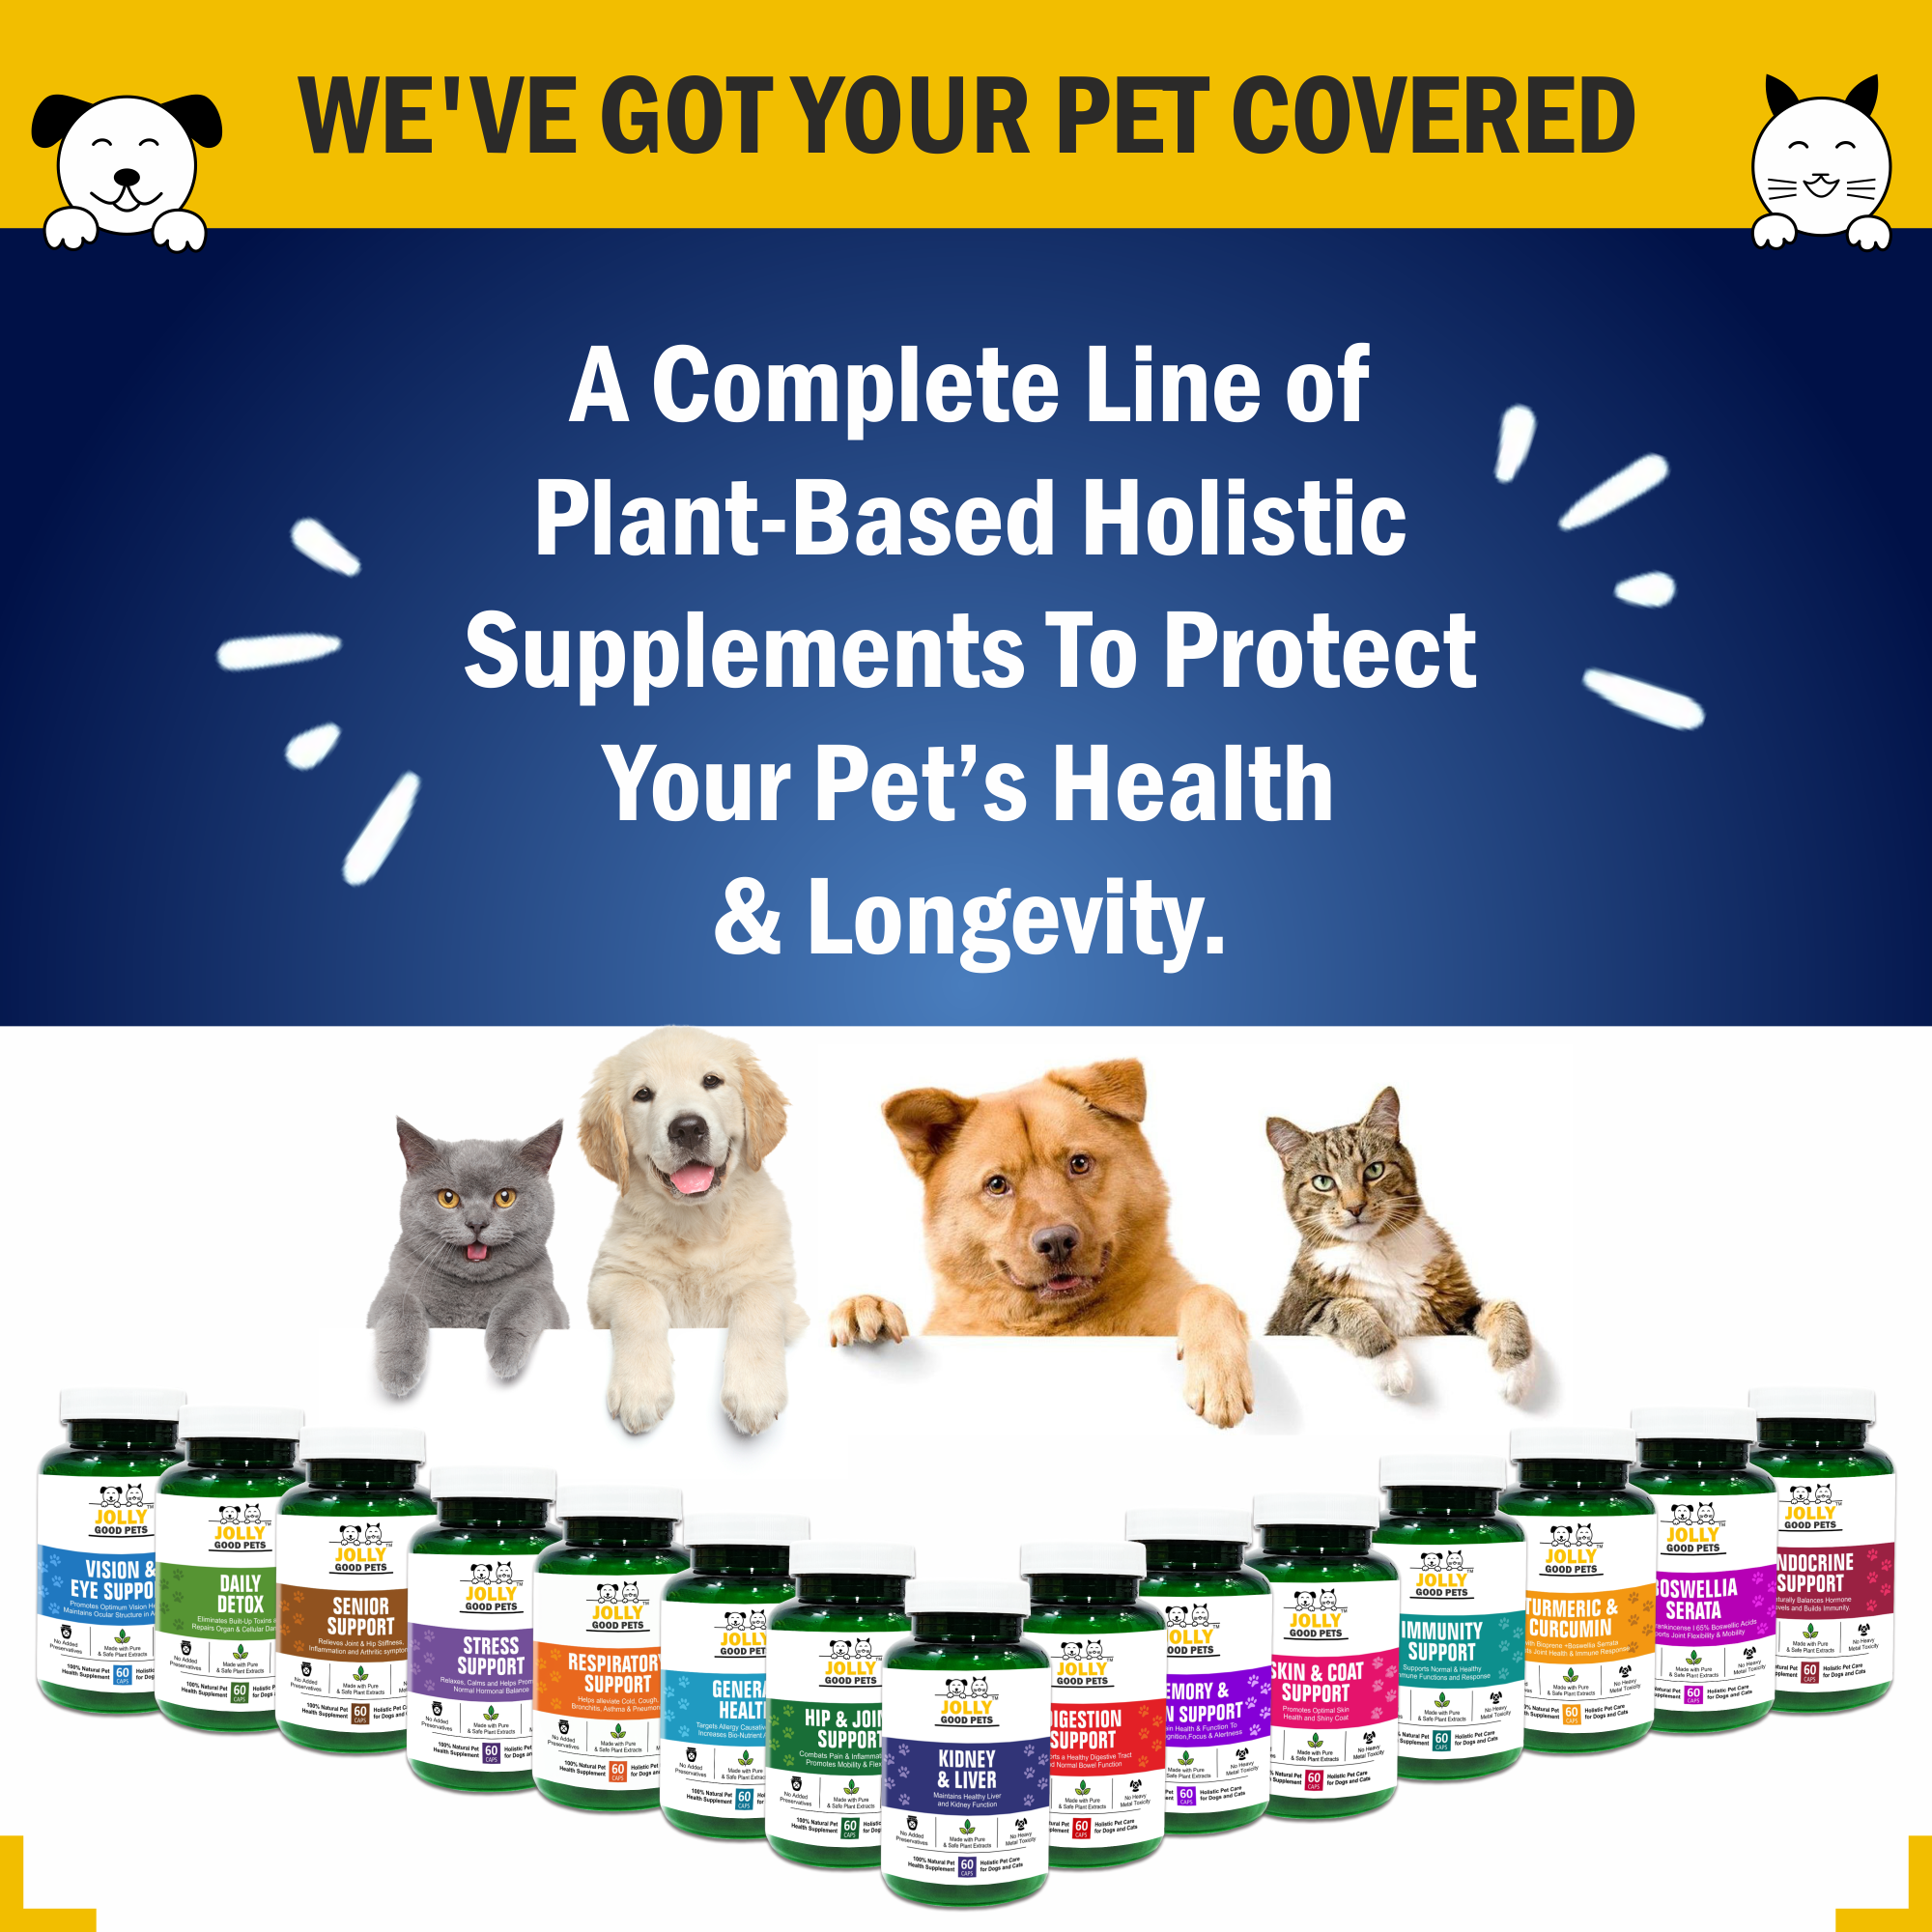 Jolly Good Pets Skin & Coat Support Supplement for Dogs & Cats I 60 Capsules